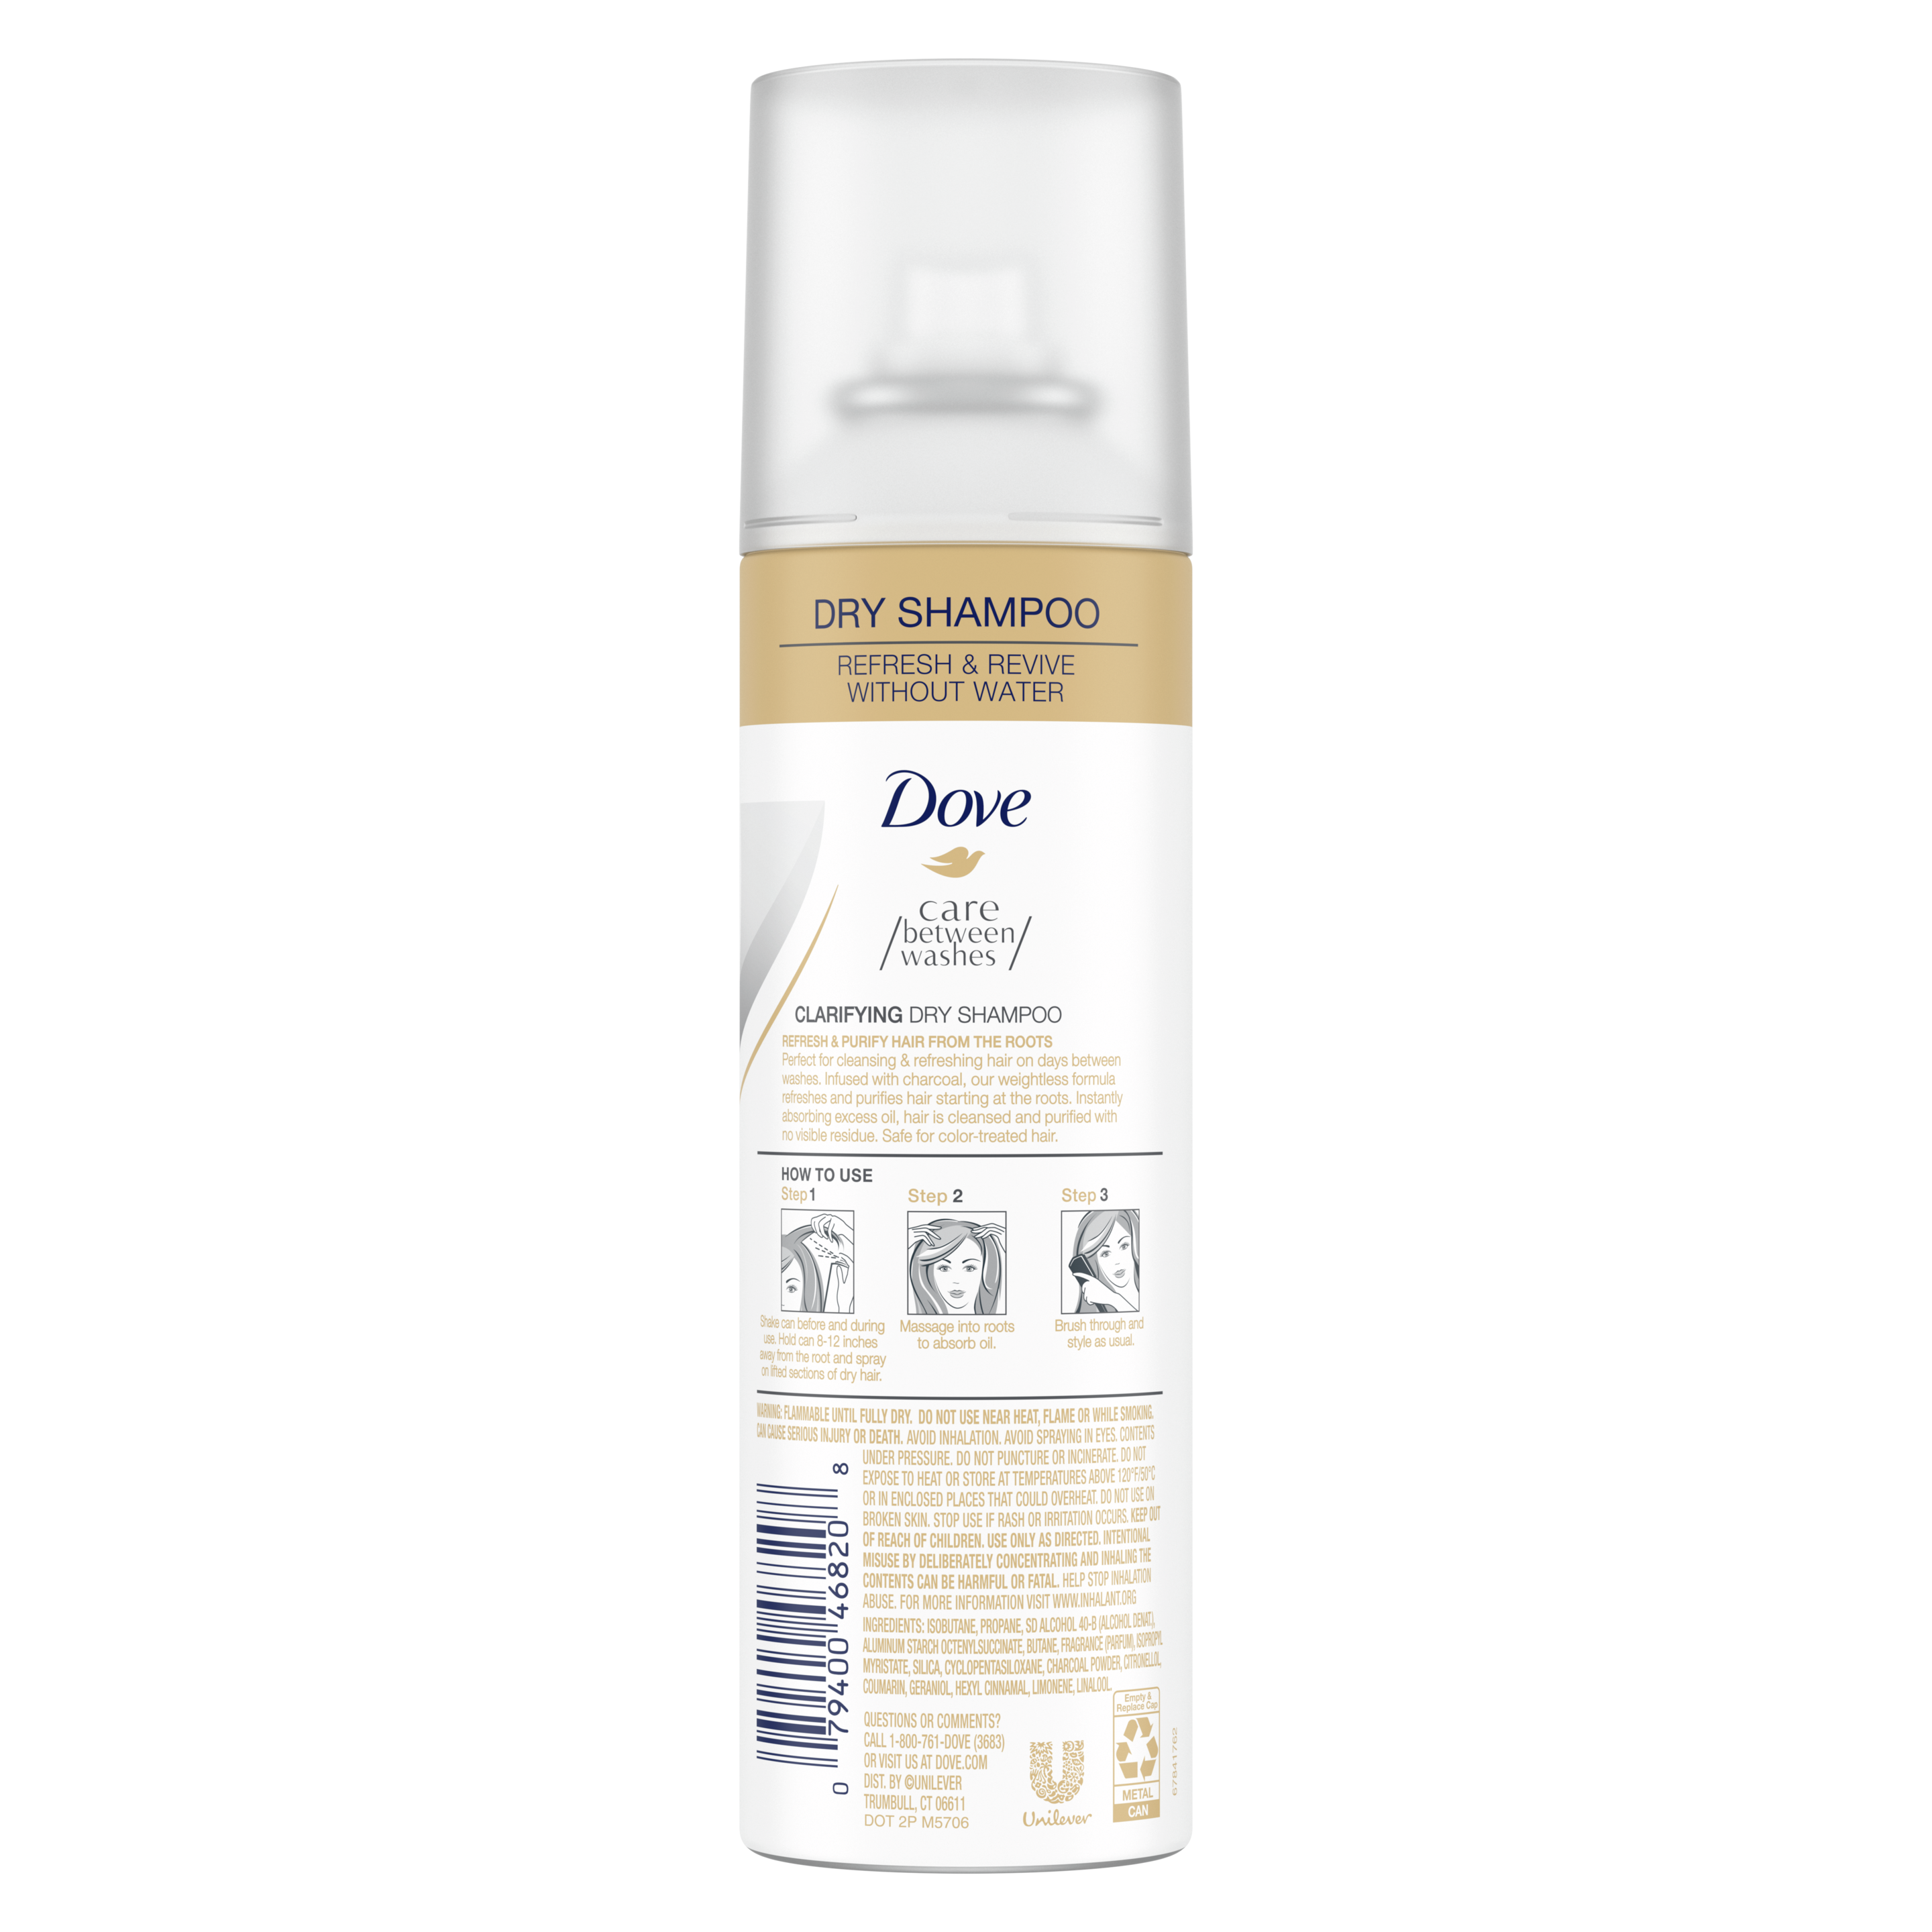 Dove Care Between Washes Clarifying Dry Shampoo 5oz